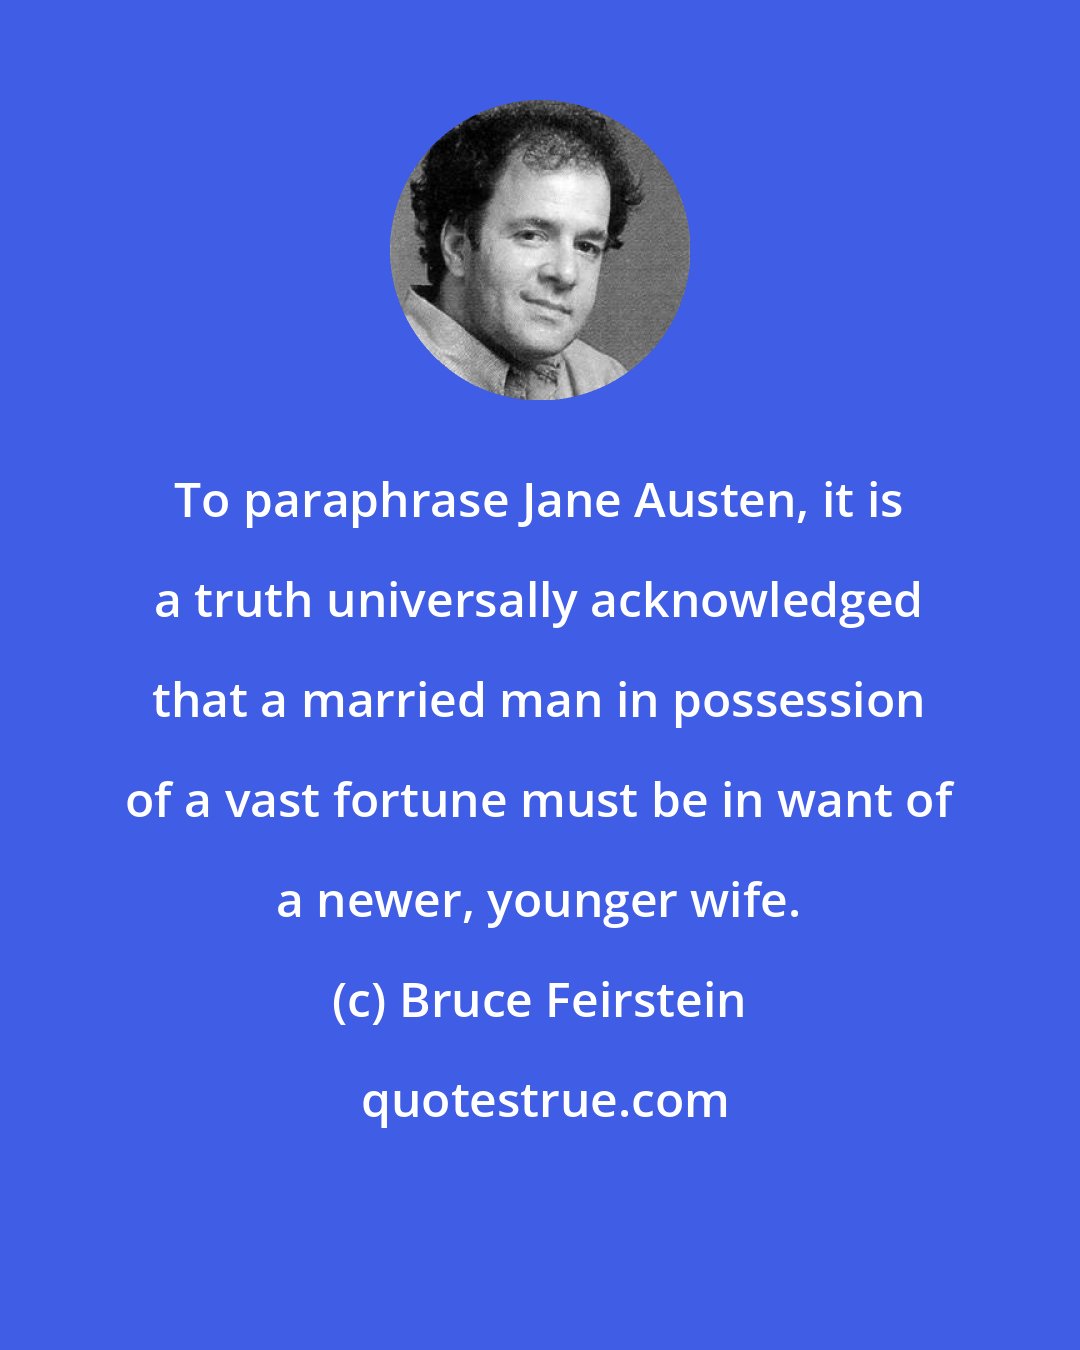 Bruce Feirstein: To paraphrase Jane Austen, it is a truth universally acknowledged that a married man in possession of a vast fortune must be in want of a newer, younger wife.